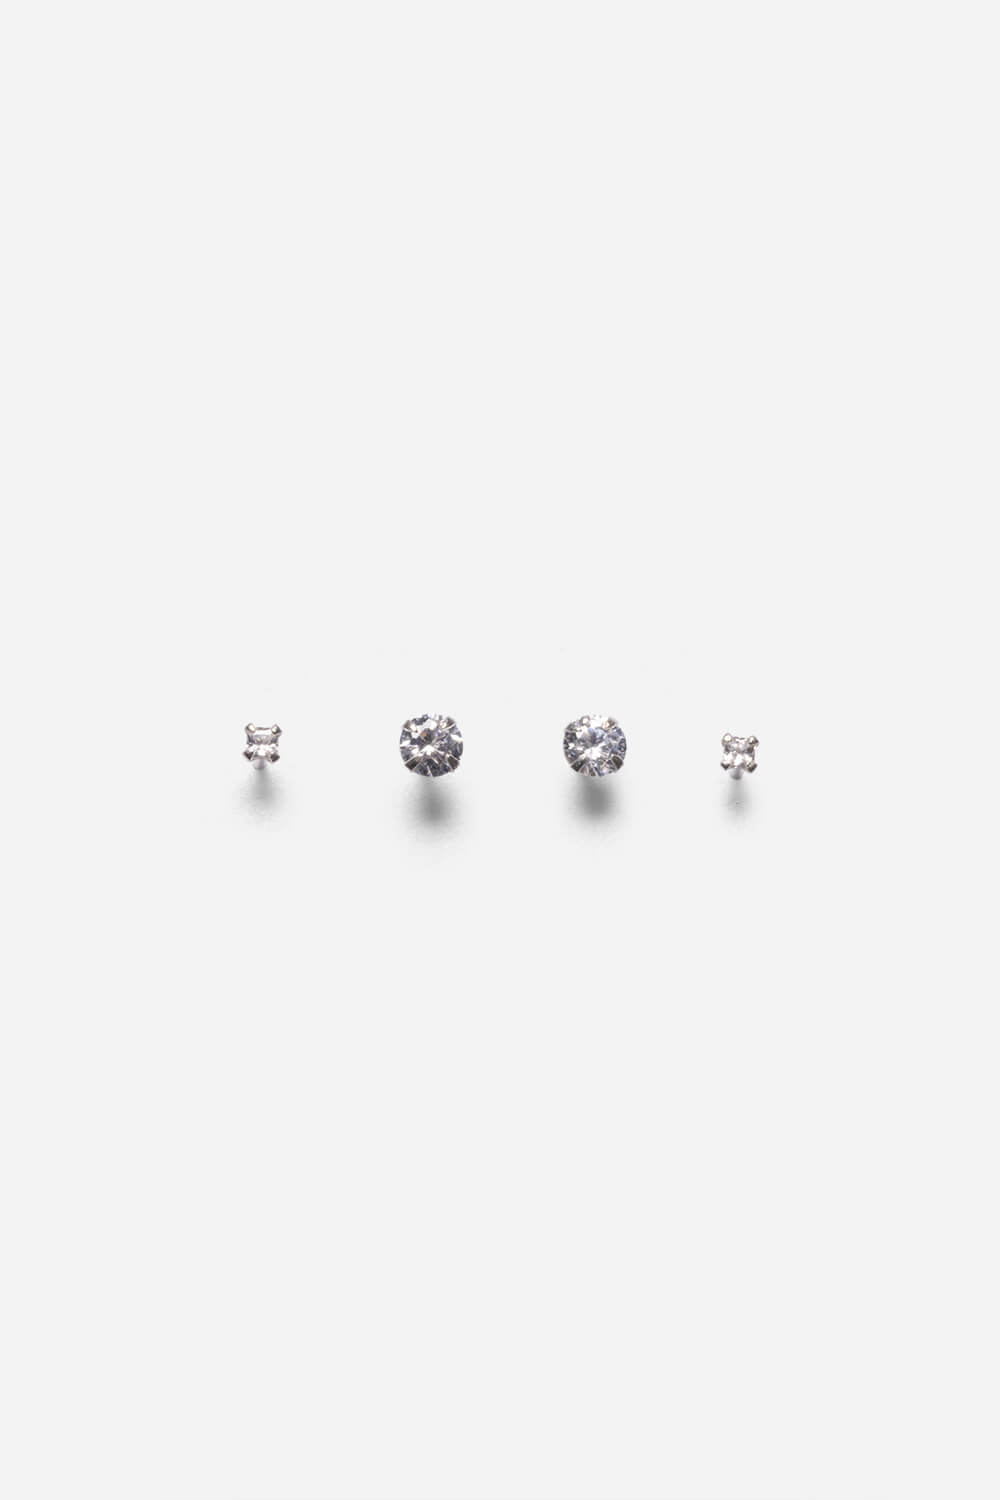 Silver Sterling Silver Cubic Zirconia Stud Earring Set, Image 1 of 2